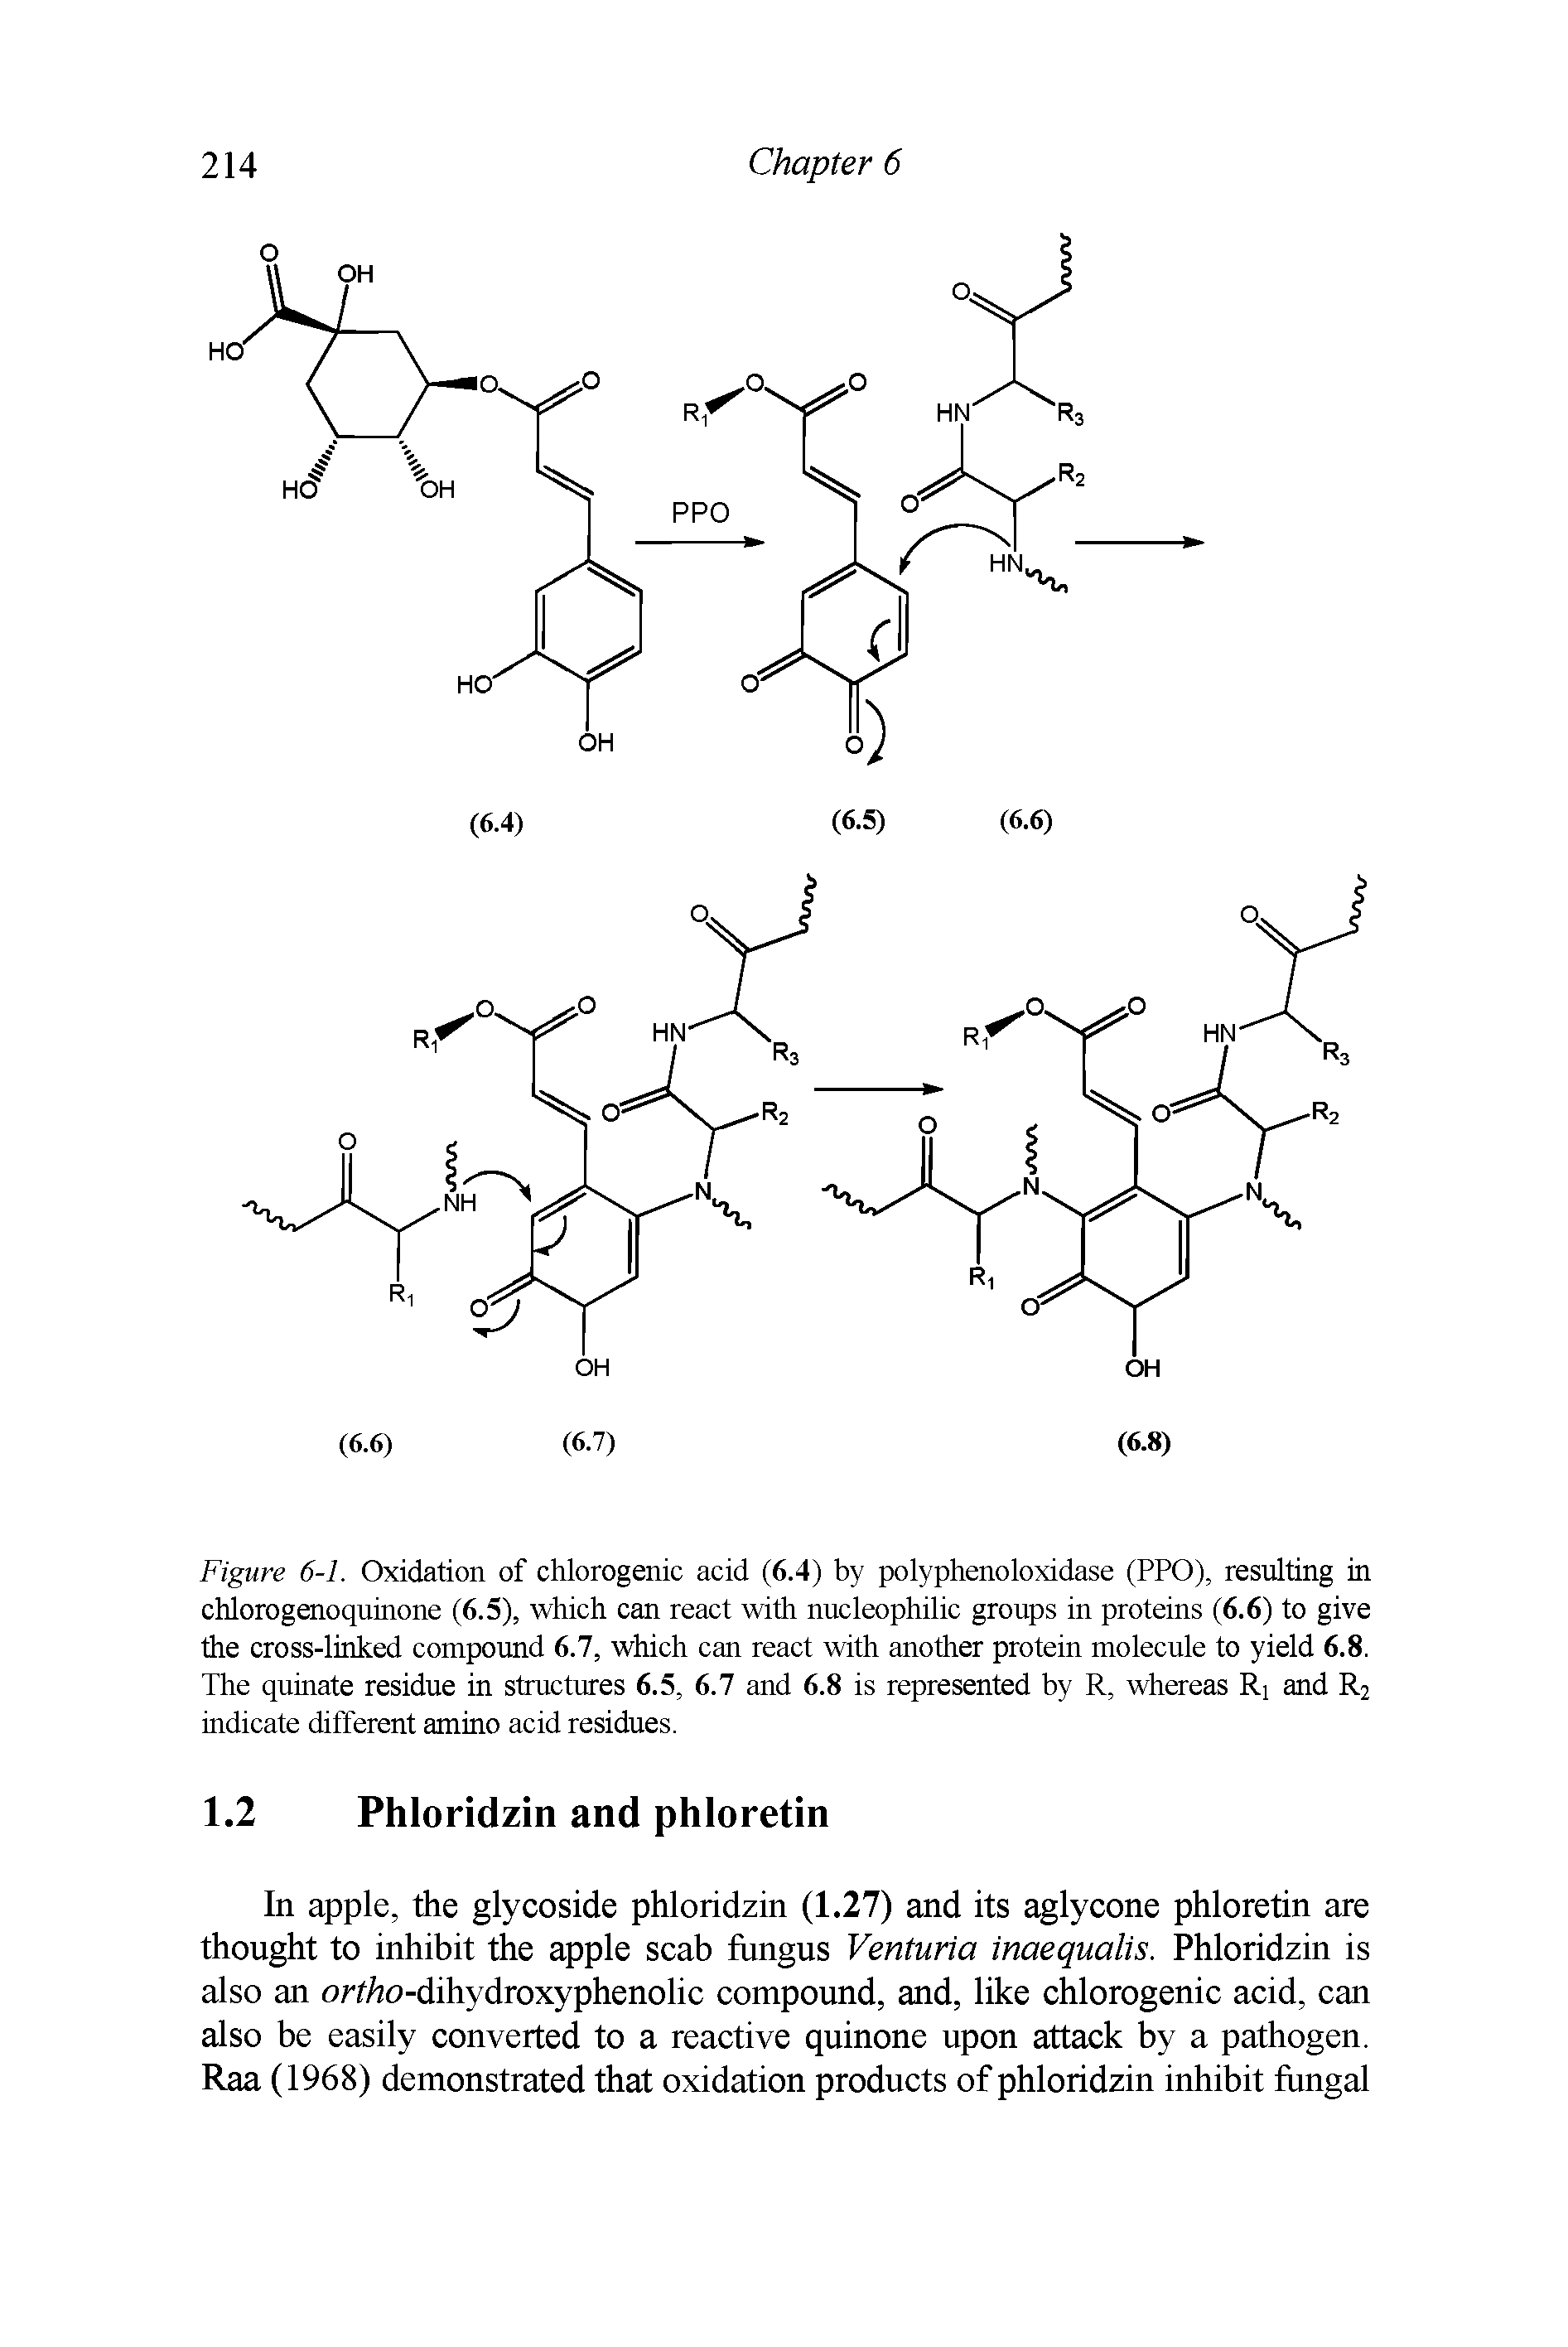 Figure 6-1. Oxidation of chlorogenic acid (6.4) by polyphenoloxidase (PPO), resulting in chlorogenoquinone (6.5), which can react with nucleophilic groups in proteins (6.6) to give the cross-linked compound 6.7, which can react with another protein molecule to yield 6.8. The quinate residue in structures 6.5, 6.7 and 6.8 is represented by R, whereas Ri and R2 indicate different amino acid residues.